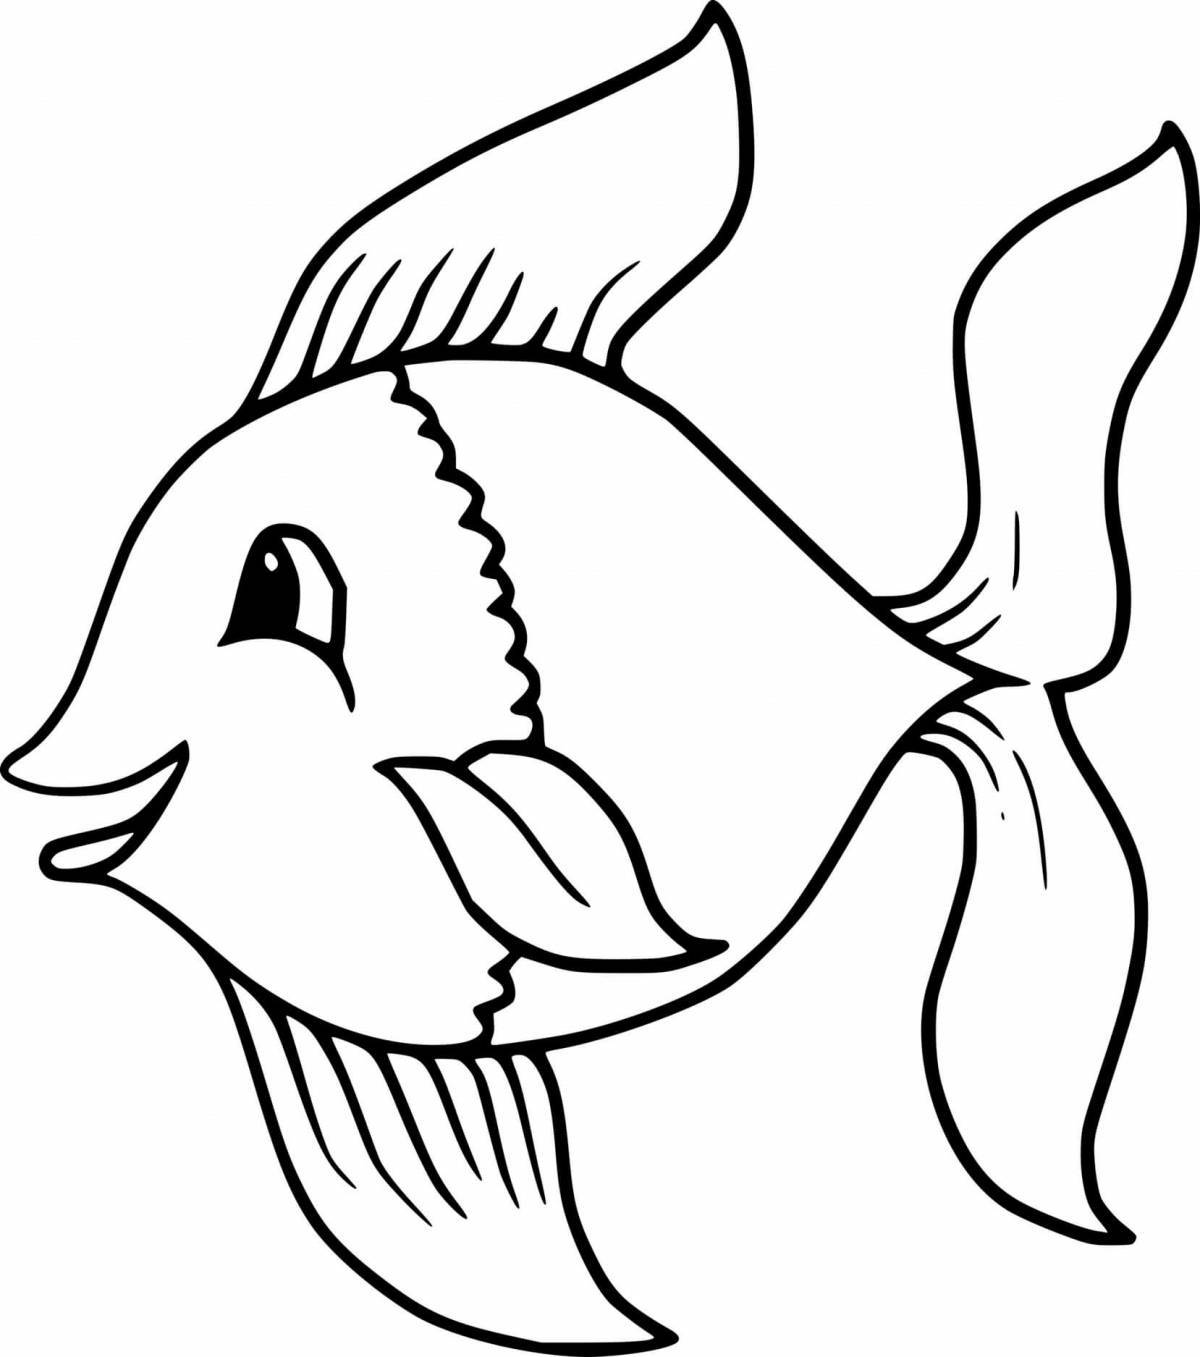 Attractive goldfish coloring book for kids